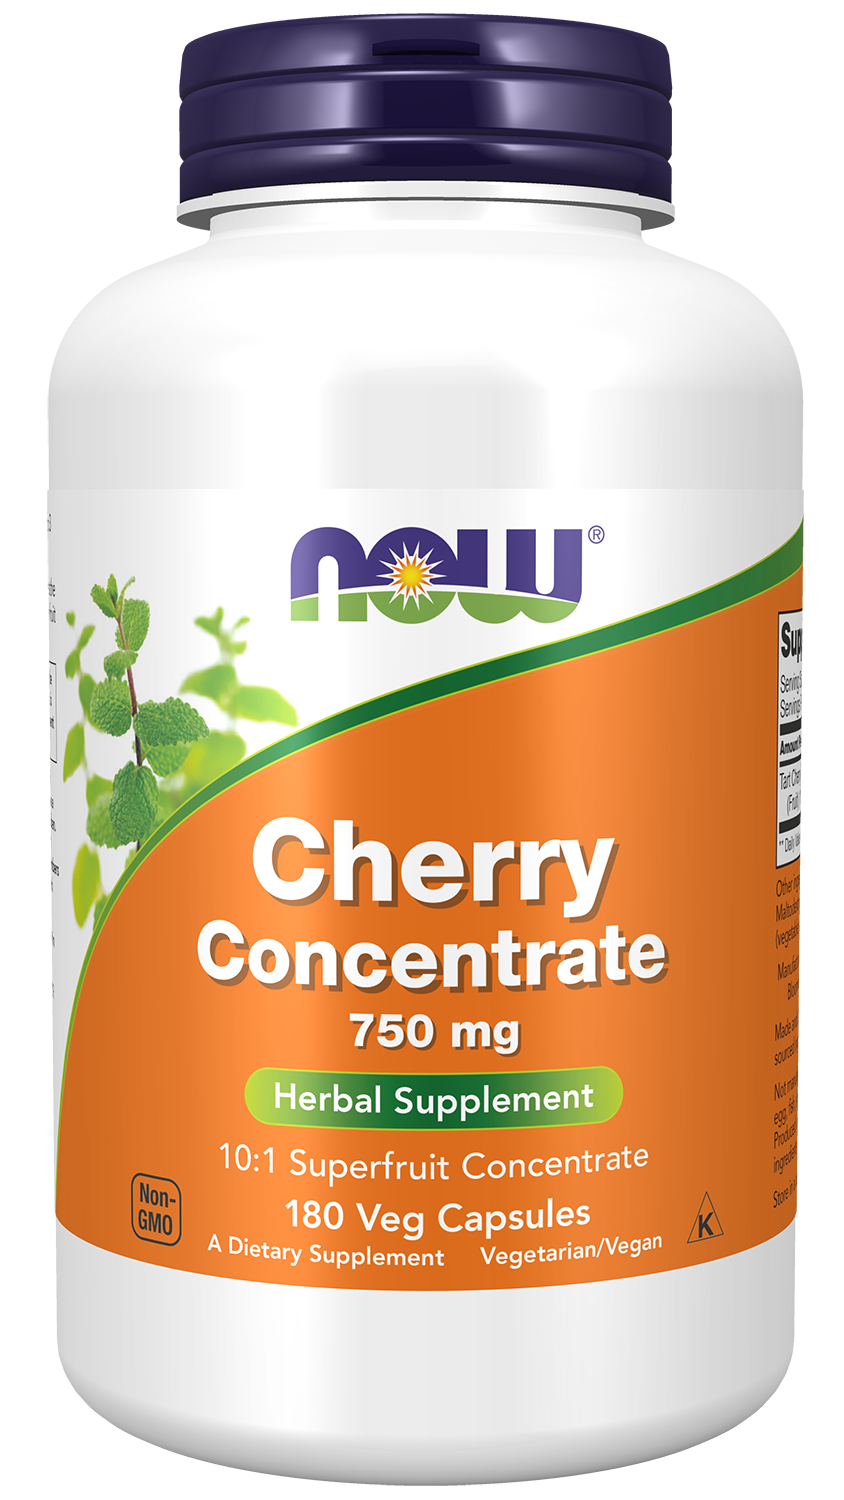 Cherry Concentrate 750 mg - 180 Veg Capsules Bottle Front